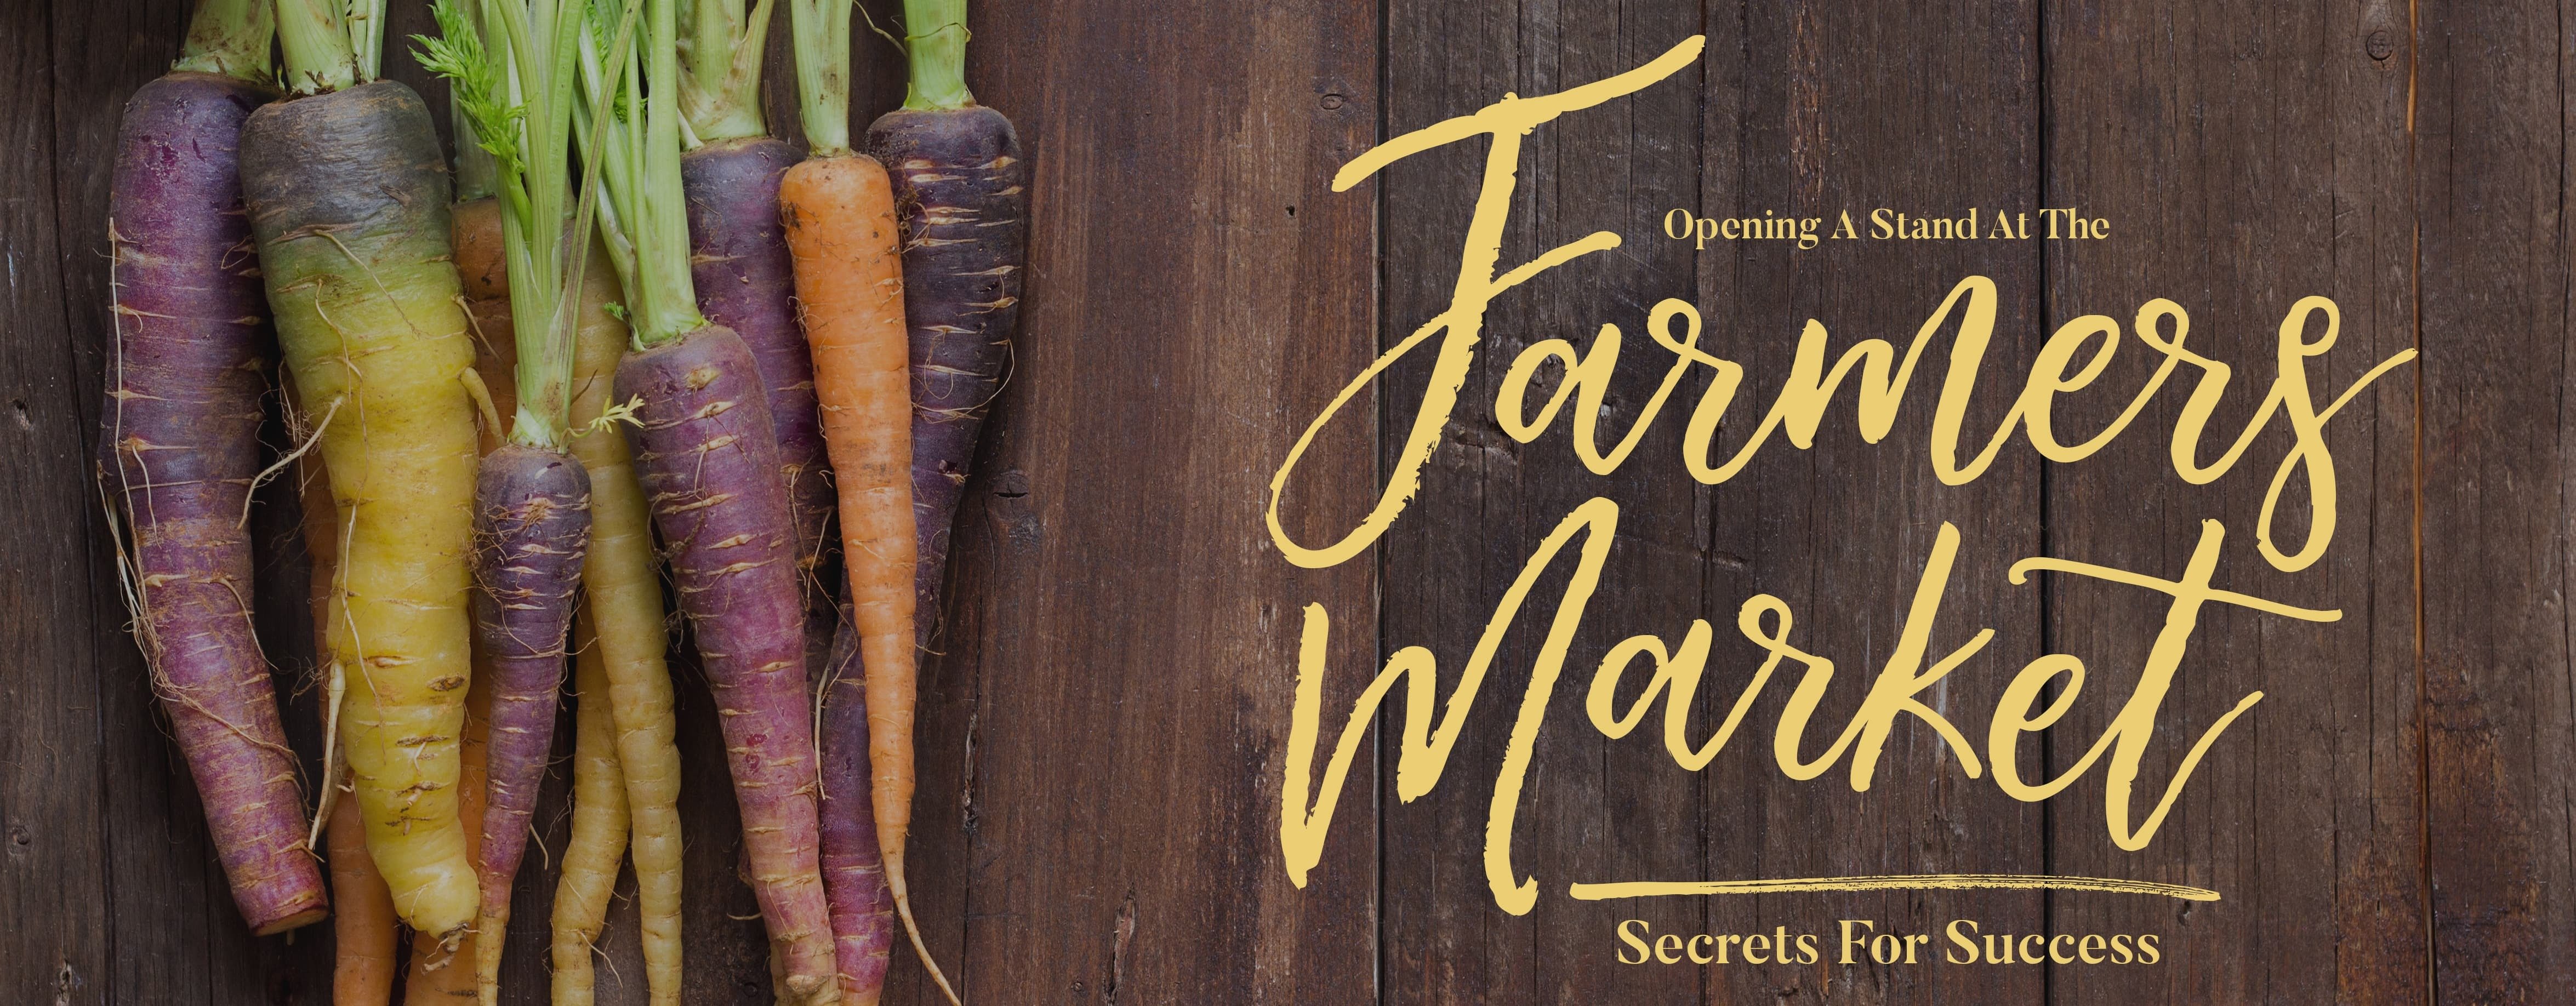 Starting a Farmers Market Stand: Secrets for Success